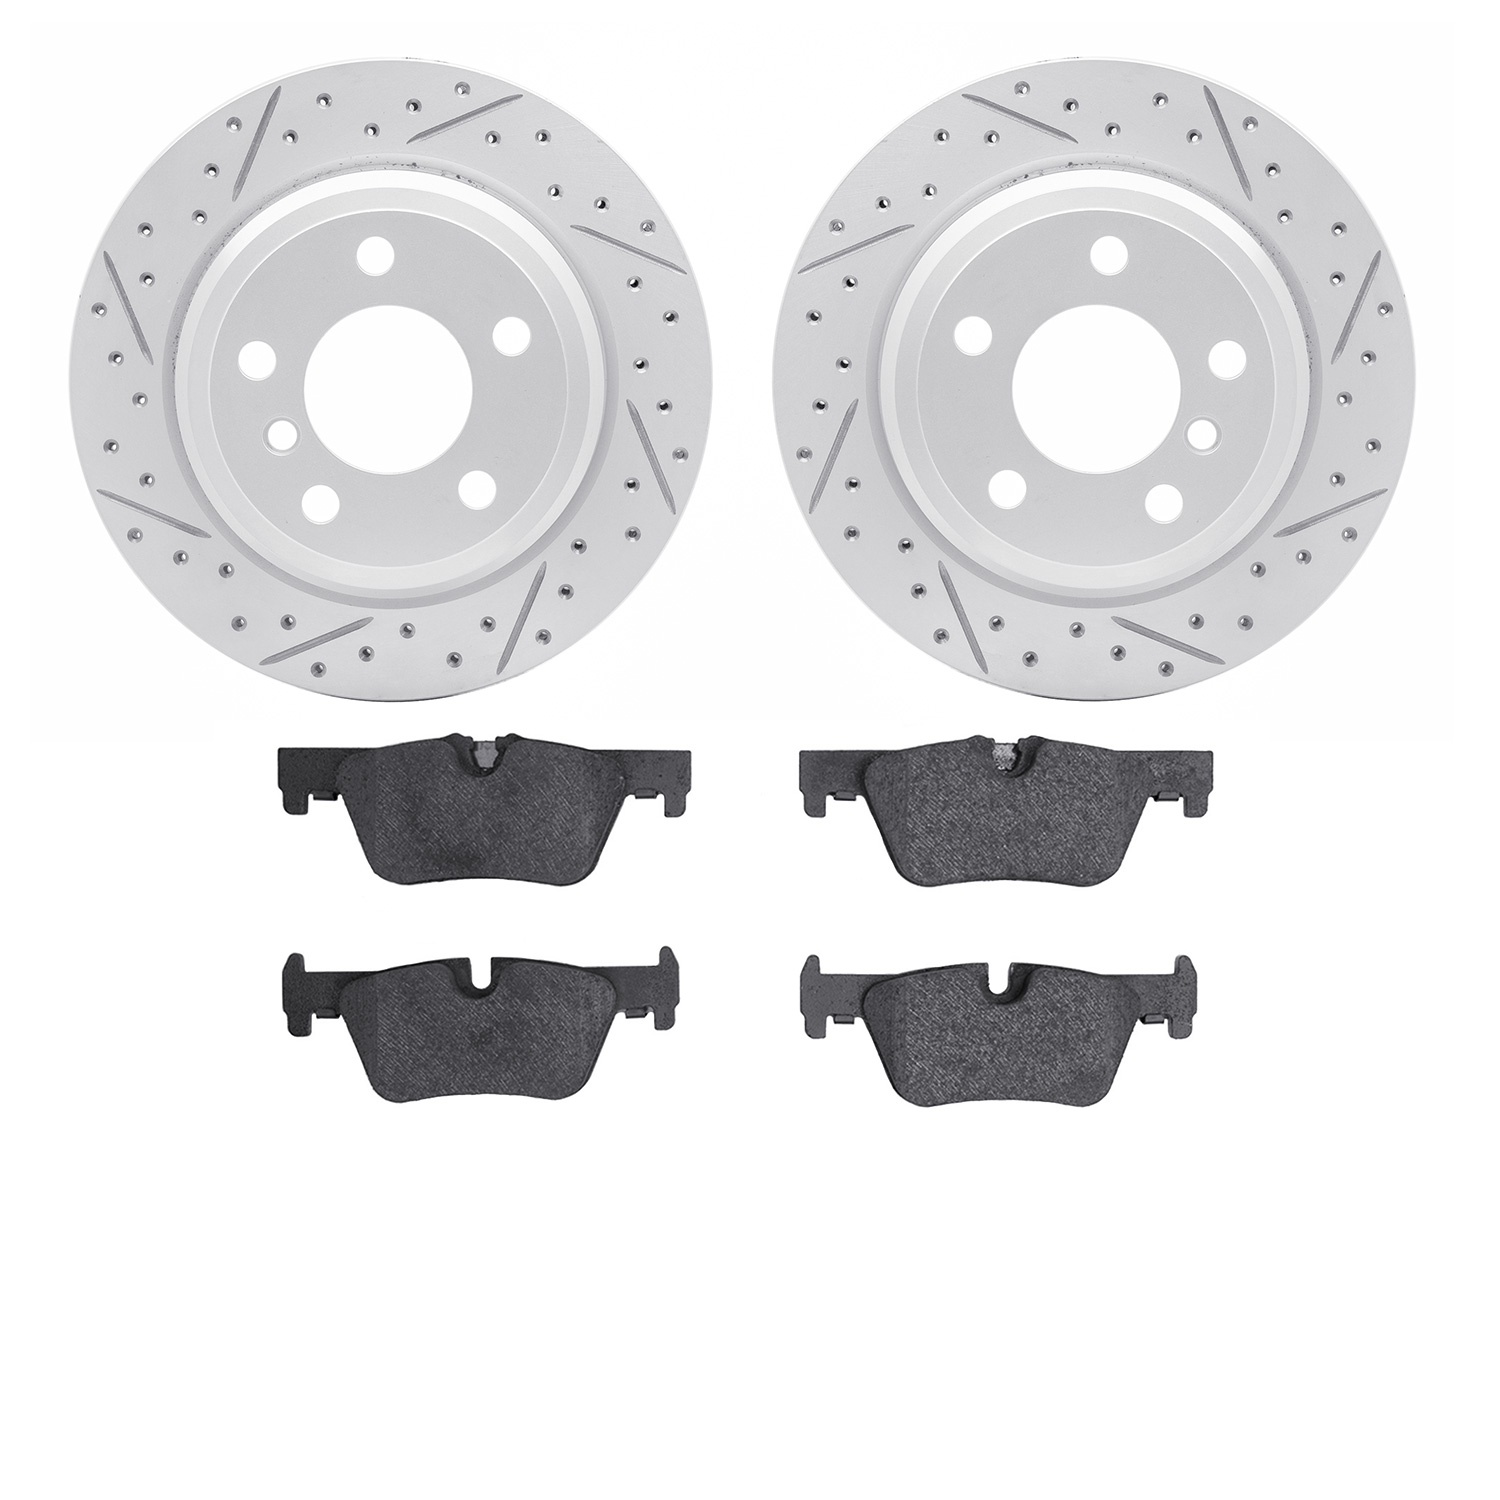 2502-31100 Geoperformance Drilled/Slotted Rotors w/5000 Advanced Brake Pads Kit, 2013-2020 BMW, Position: Rear